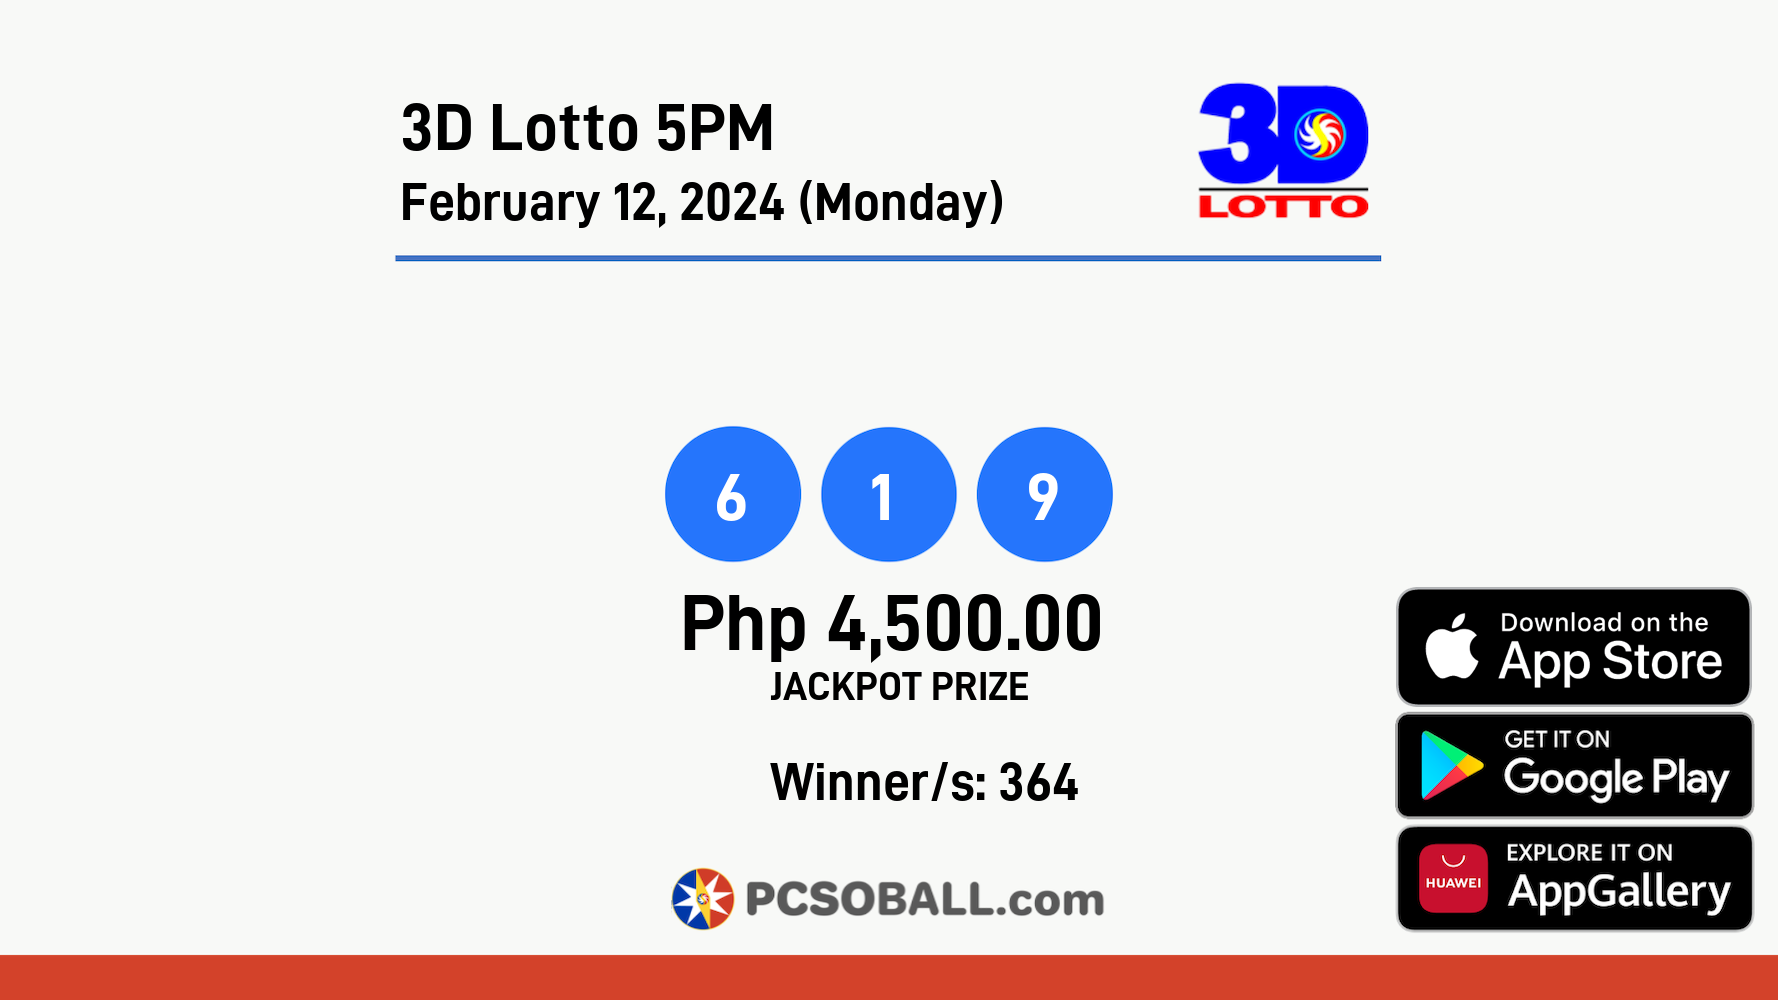 3D Lotto 5PM February 12, 2024 (Monday) Result